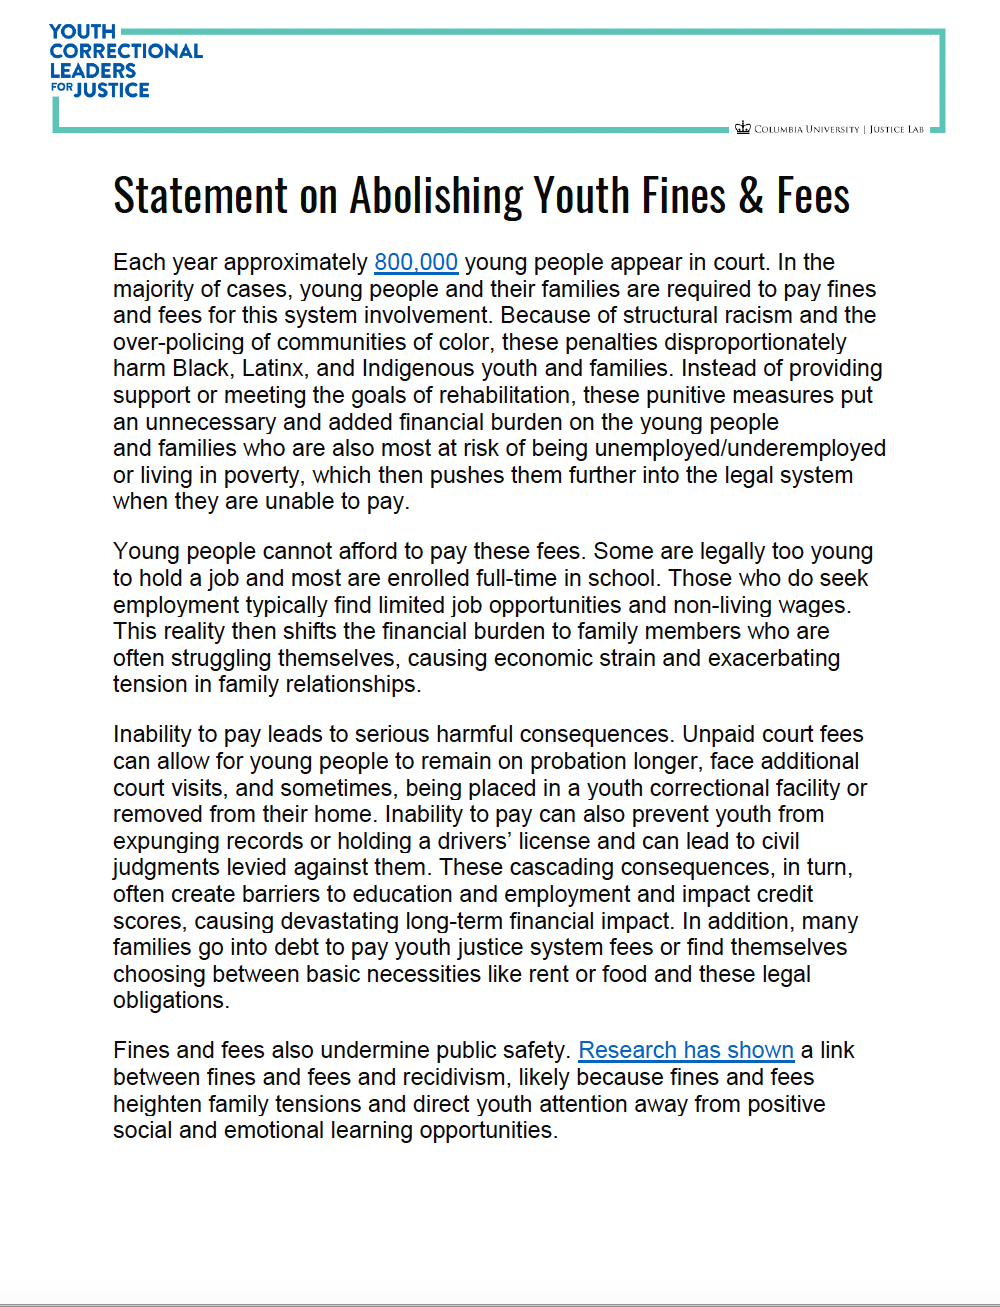 Youth Correctional Leaders for Justice Statement in support of ending fees and fines for youth